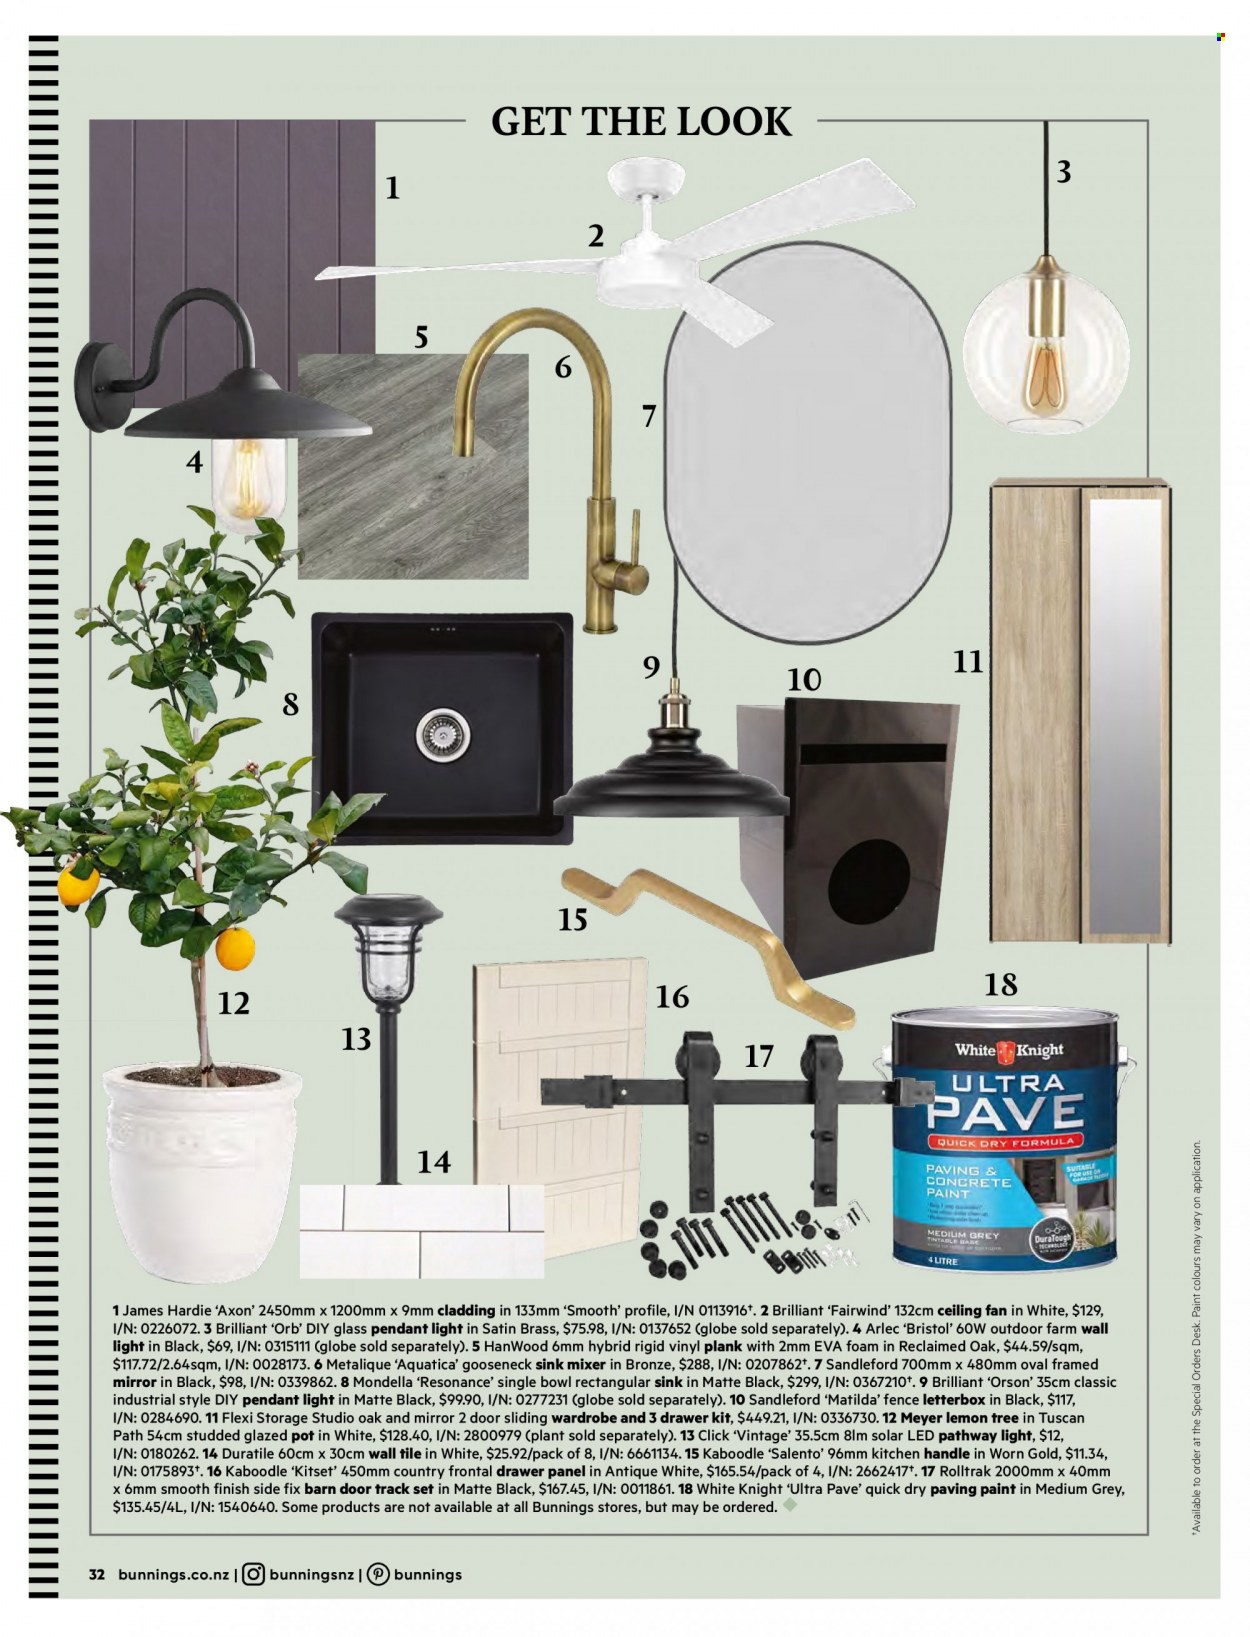 thumbnail - Bunnings Warehouse mailer - Sales products - wardrobe, desk, mirror, pot, bowl, ceiling fan, paint, LED pathway lights, solar led. Page 32.